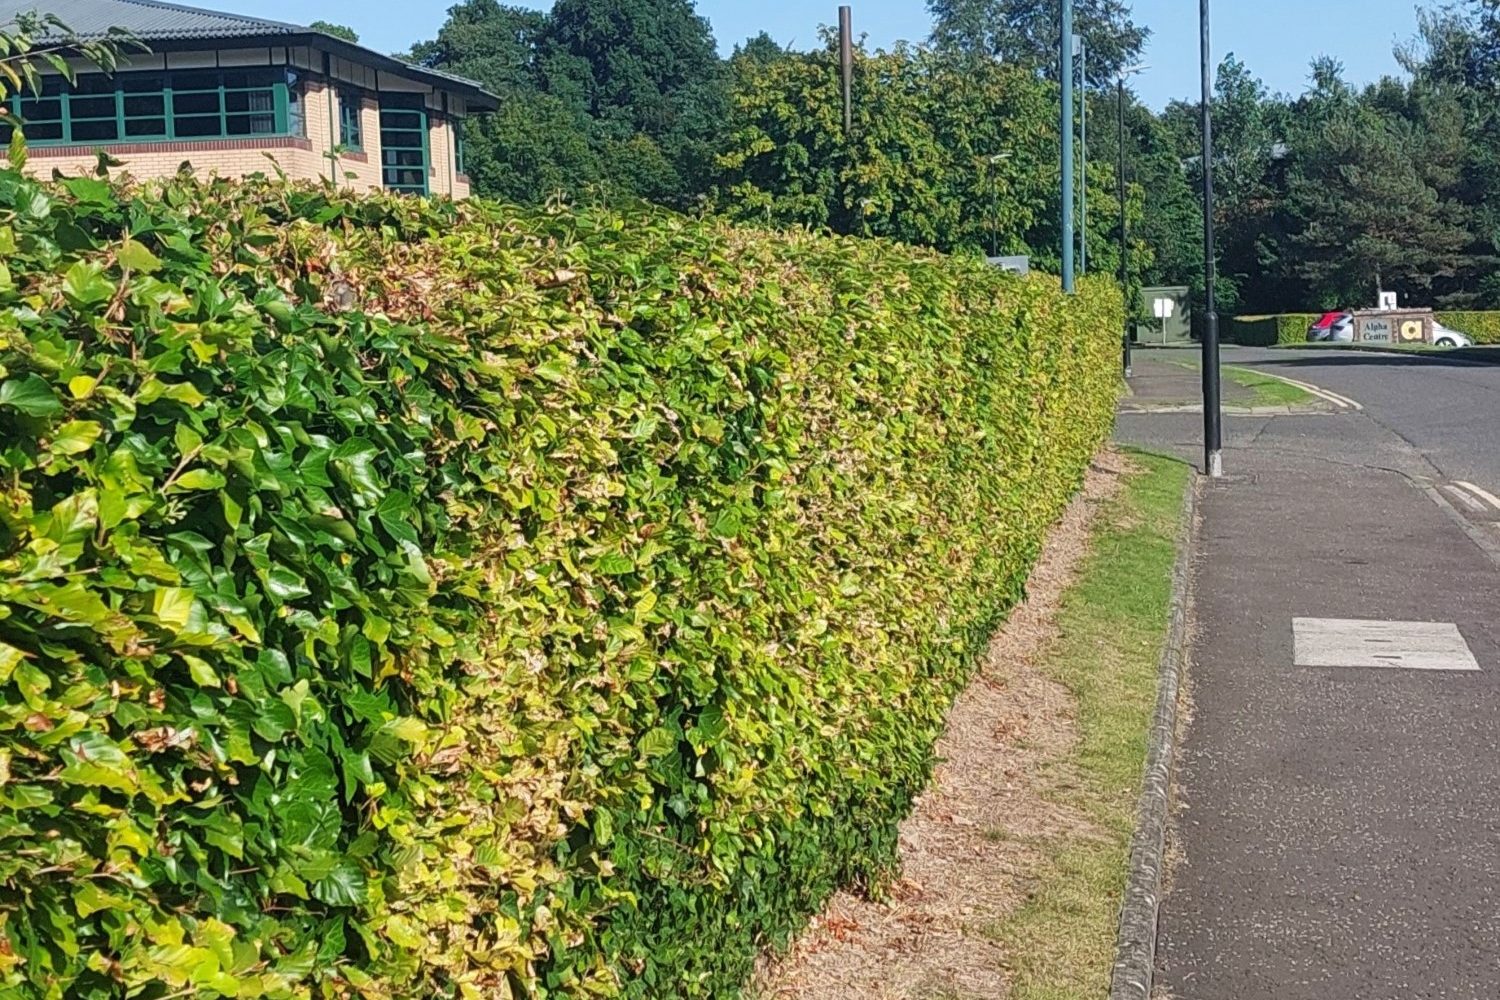 A hedge planted next to a road to improve air quality in climate ready school grounds.